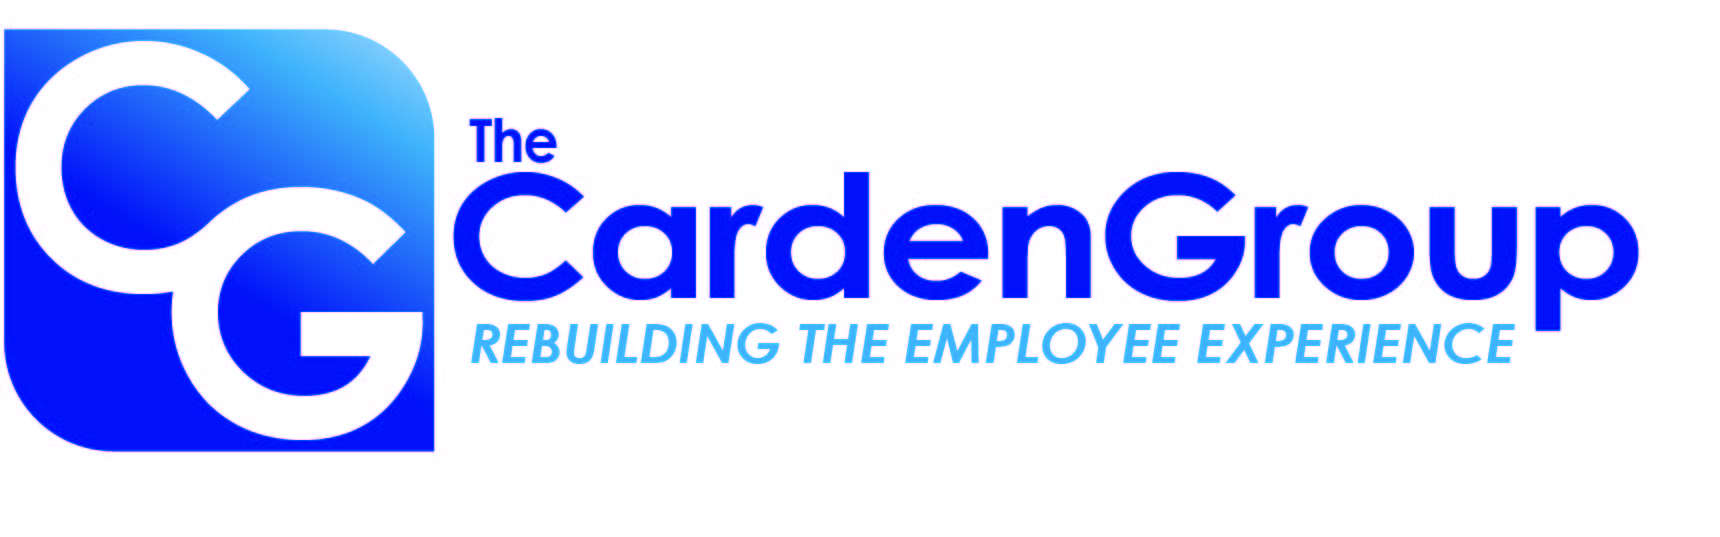 The Carden Group